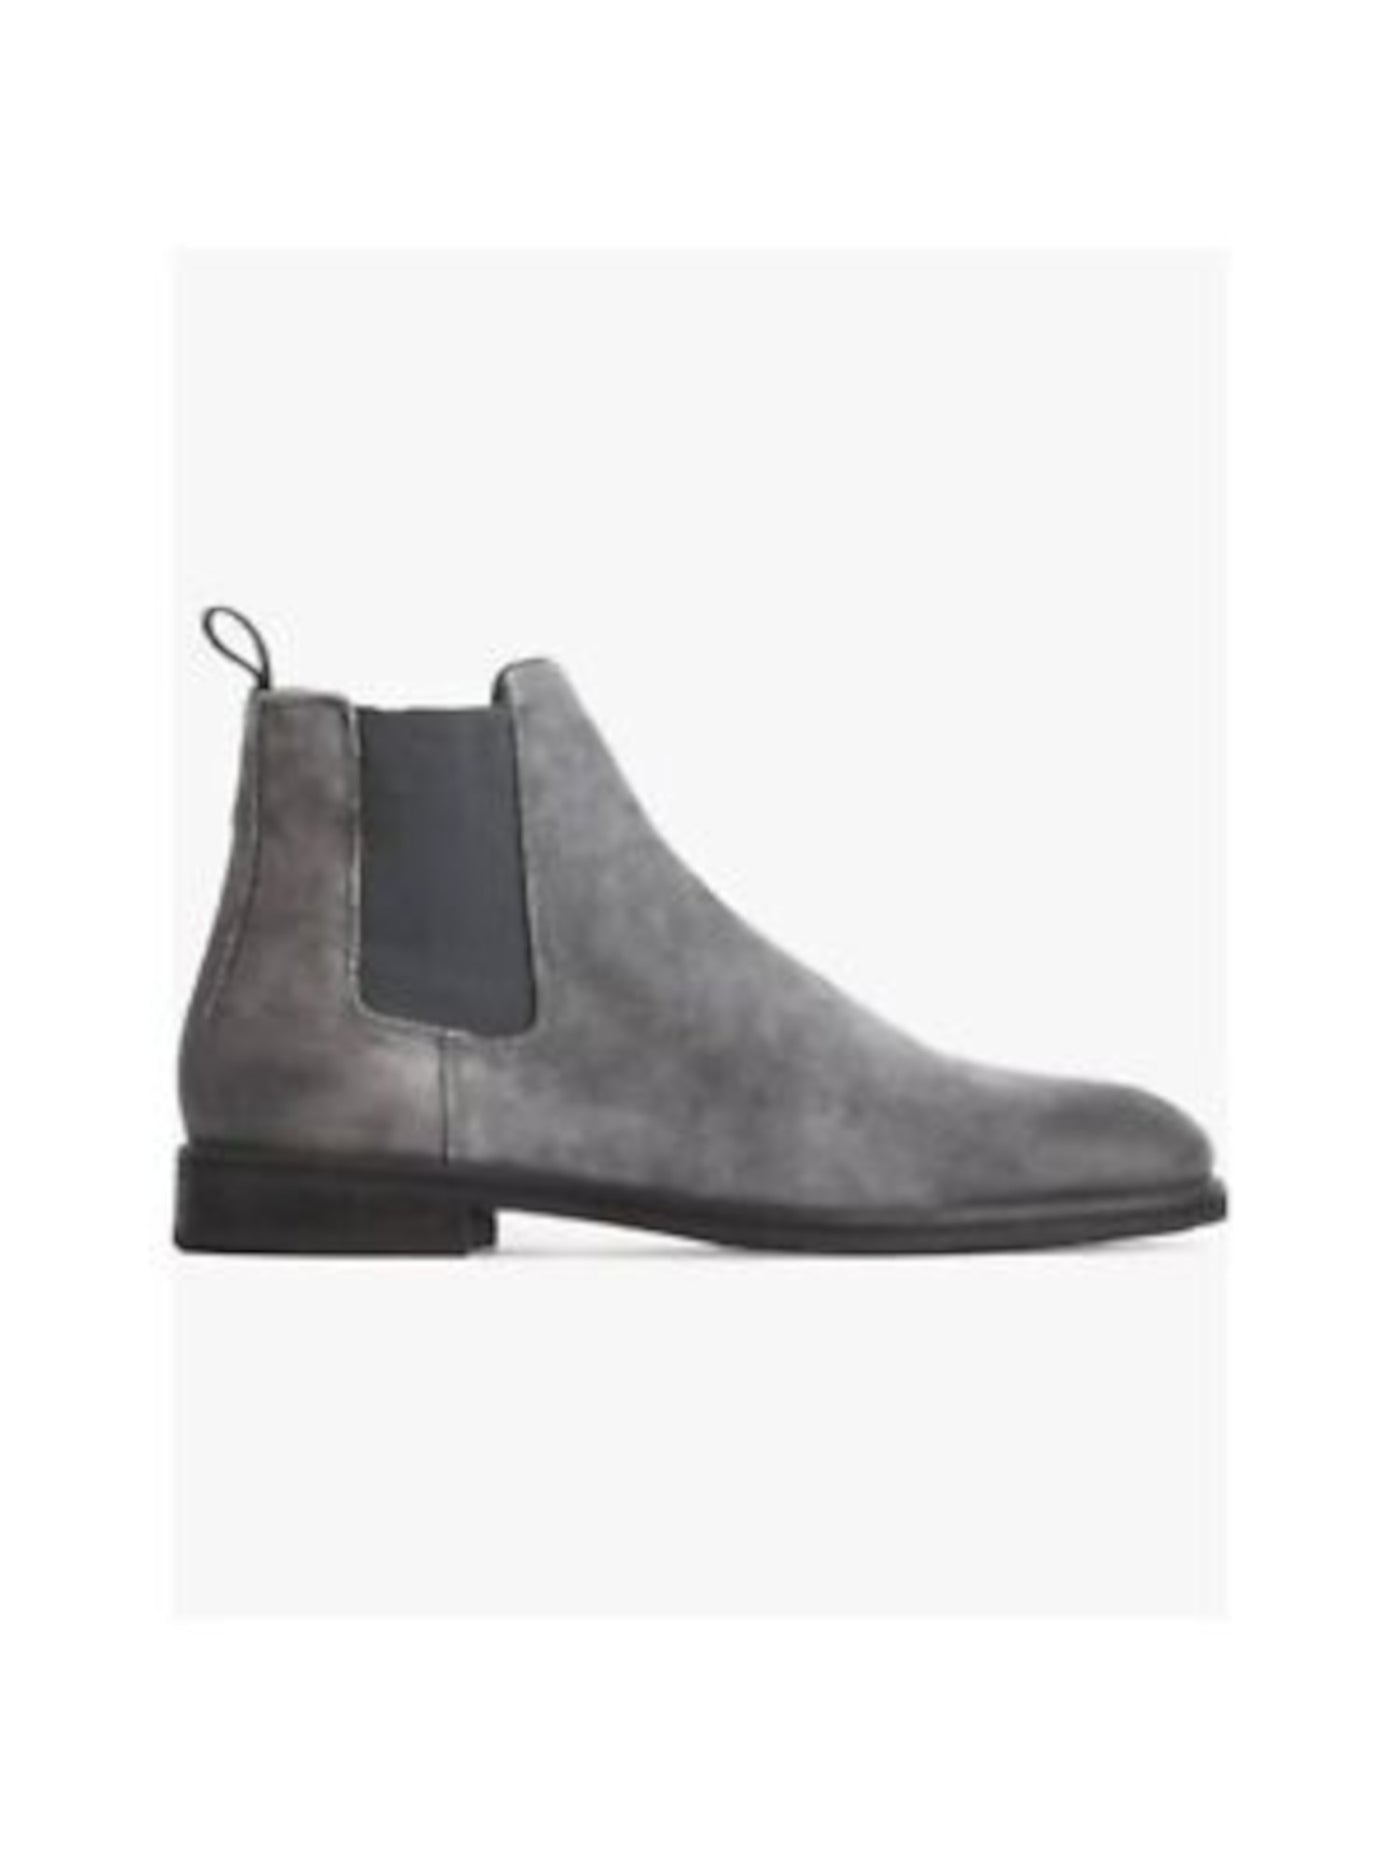 ALLSAINTS Mens Gray Pull Tab Goring Comfort Harley Round Toe Block Heel Slip On Leather Boots Shoes 41